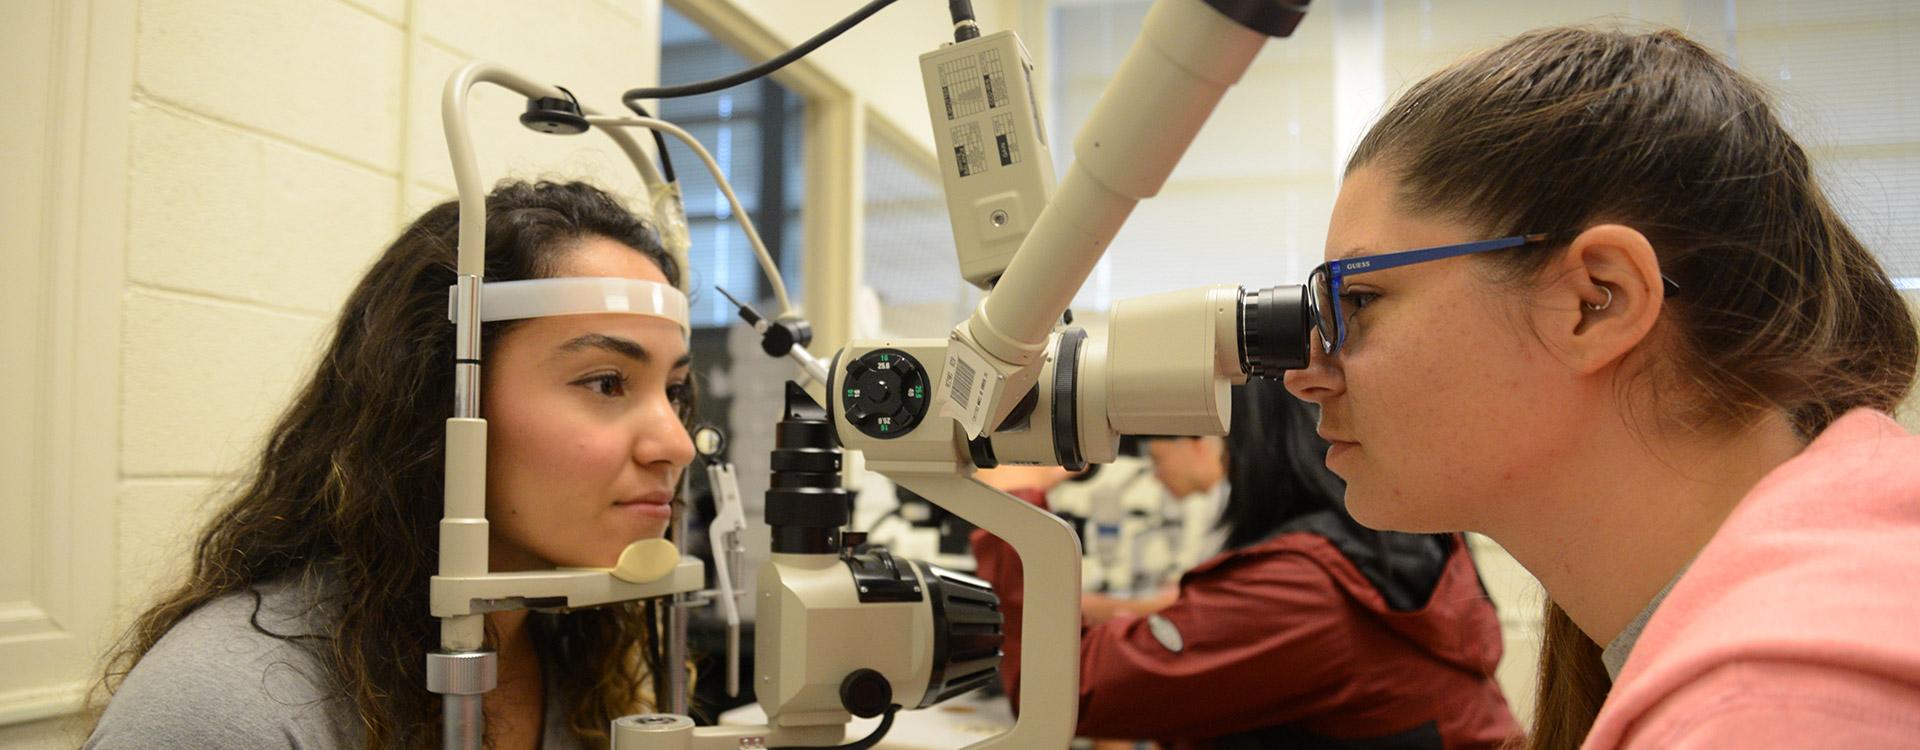 students practice using opticianry equipment in lab